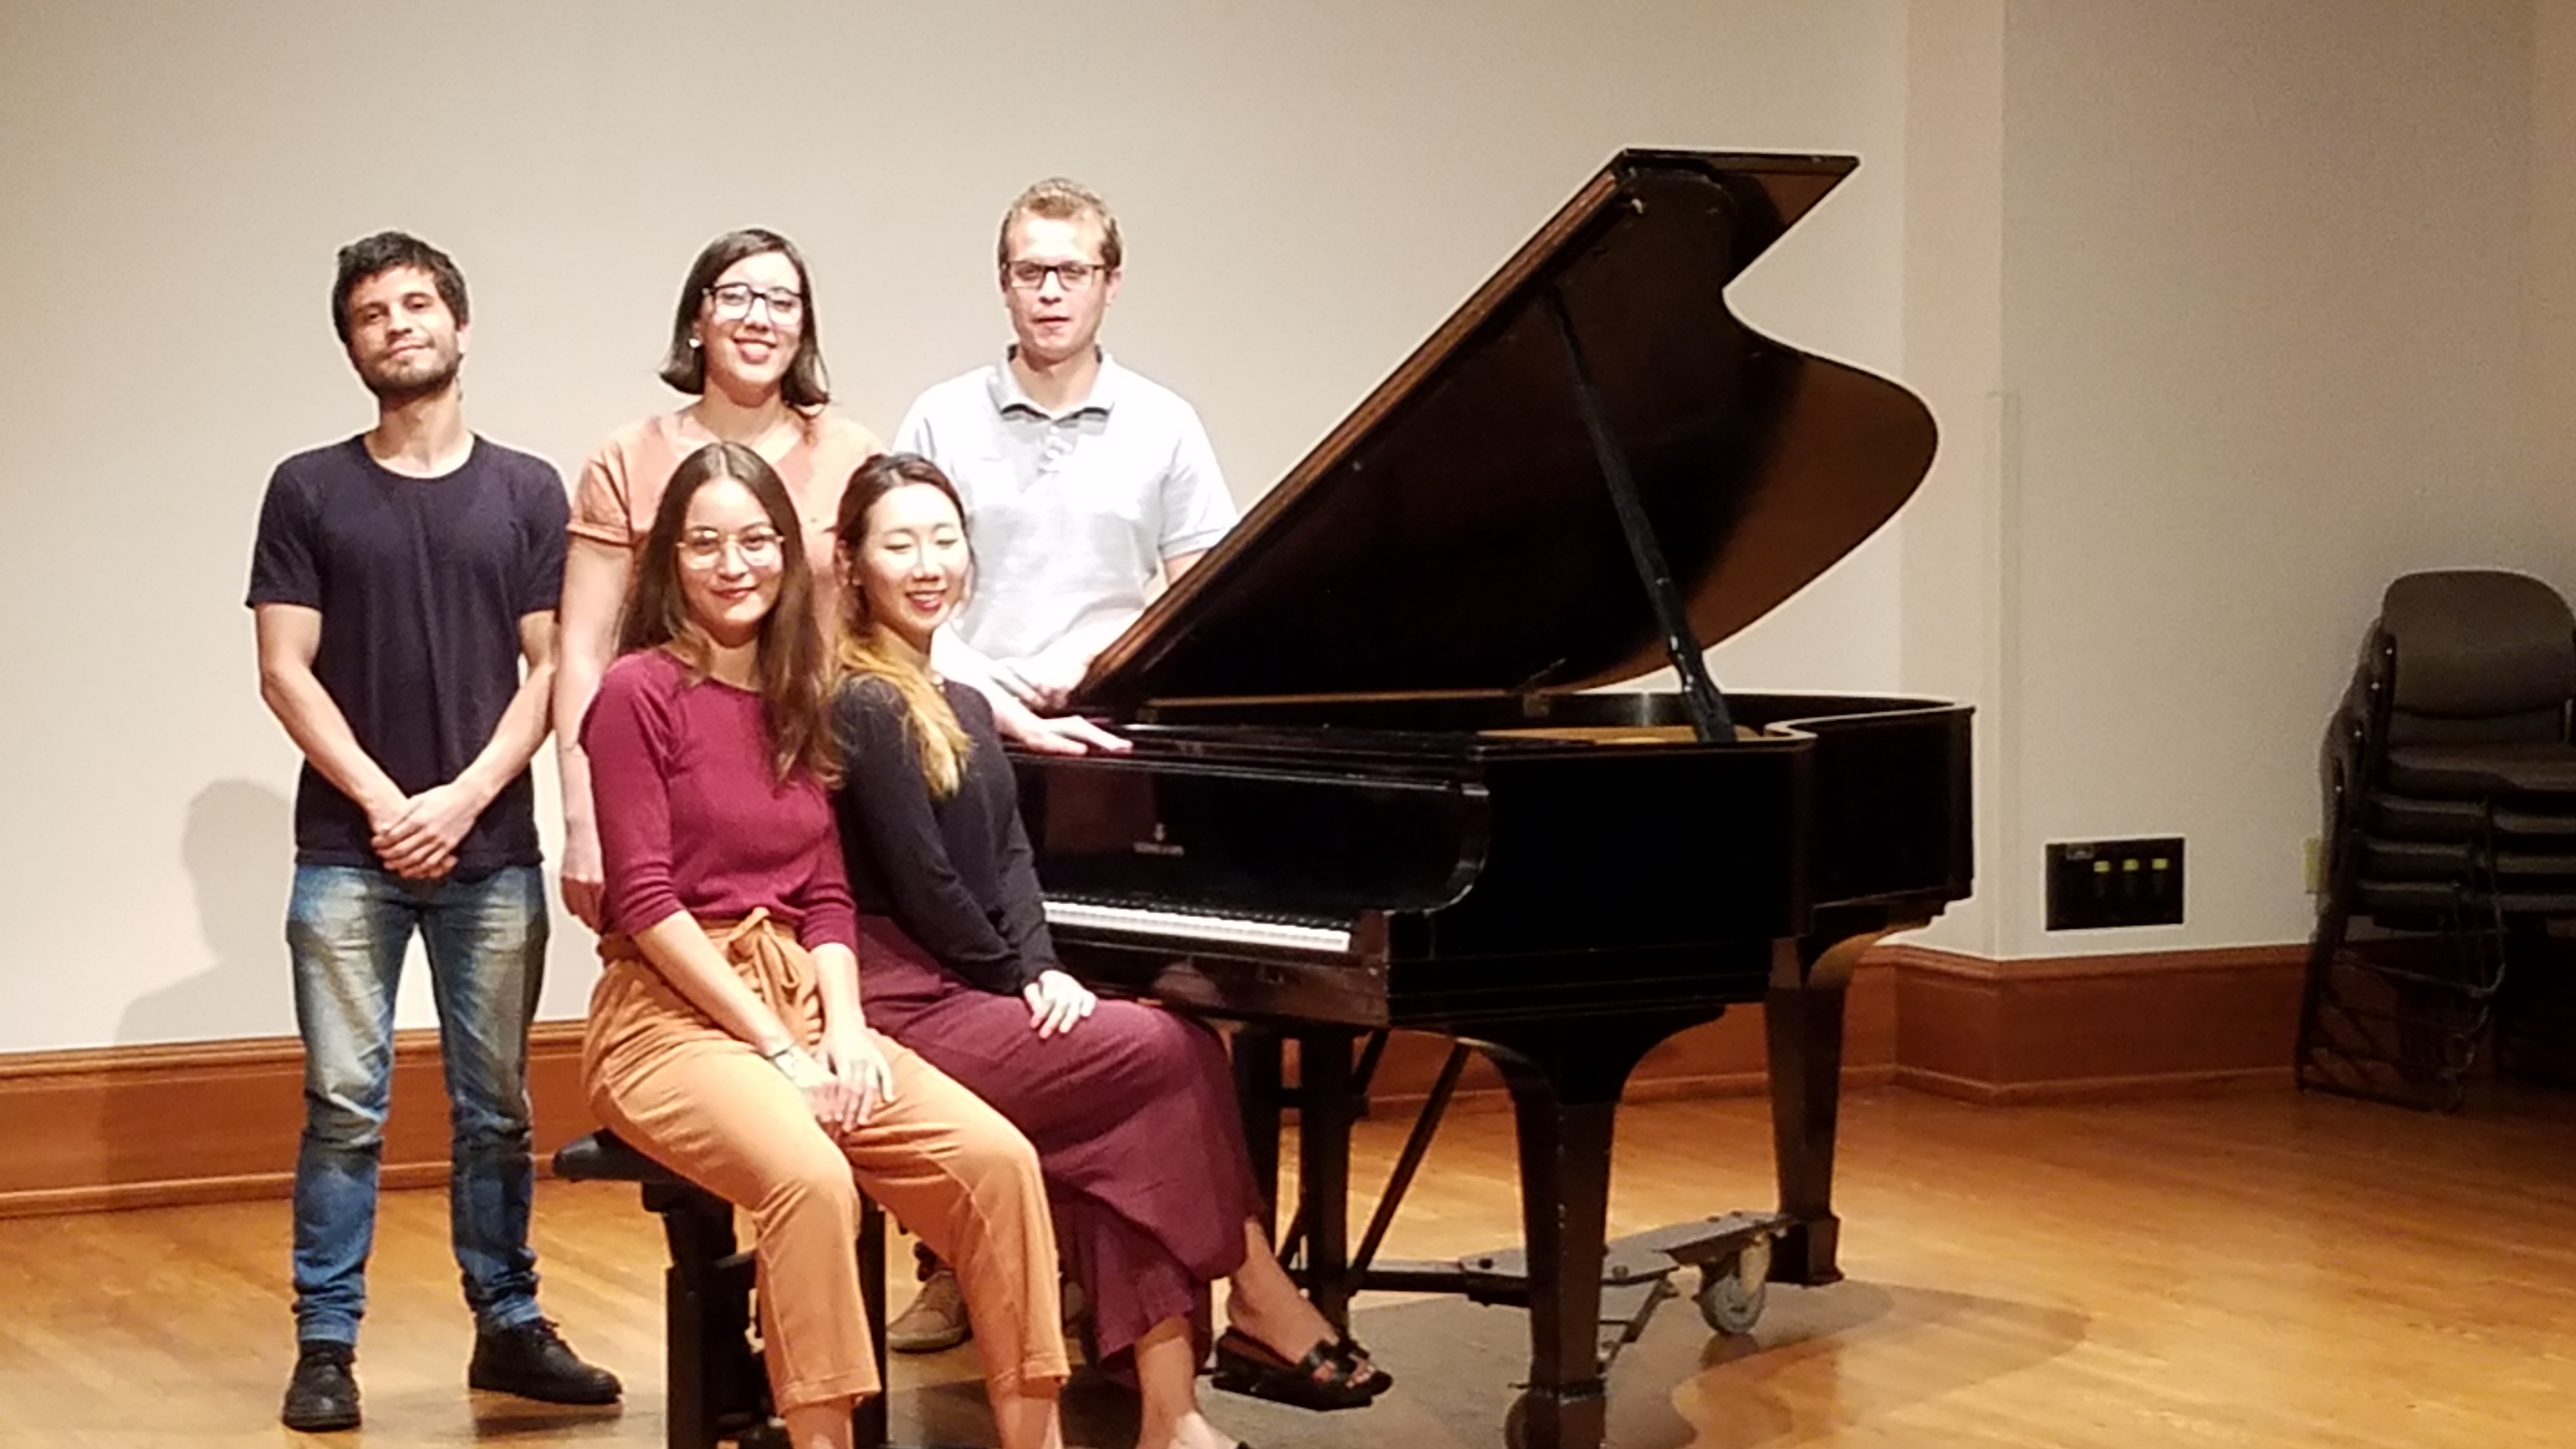 International Piano Students chat about musical backgrounds, performing at USD